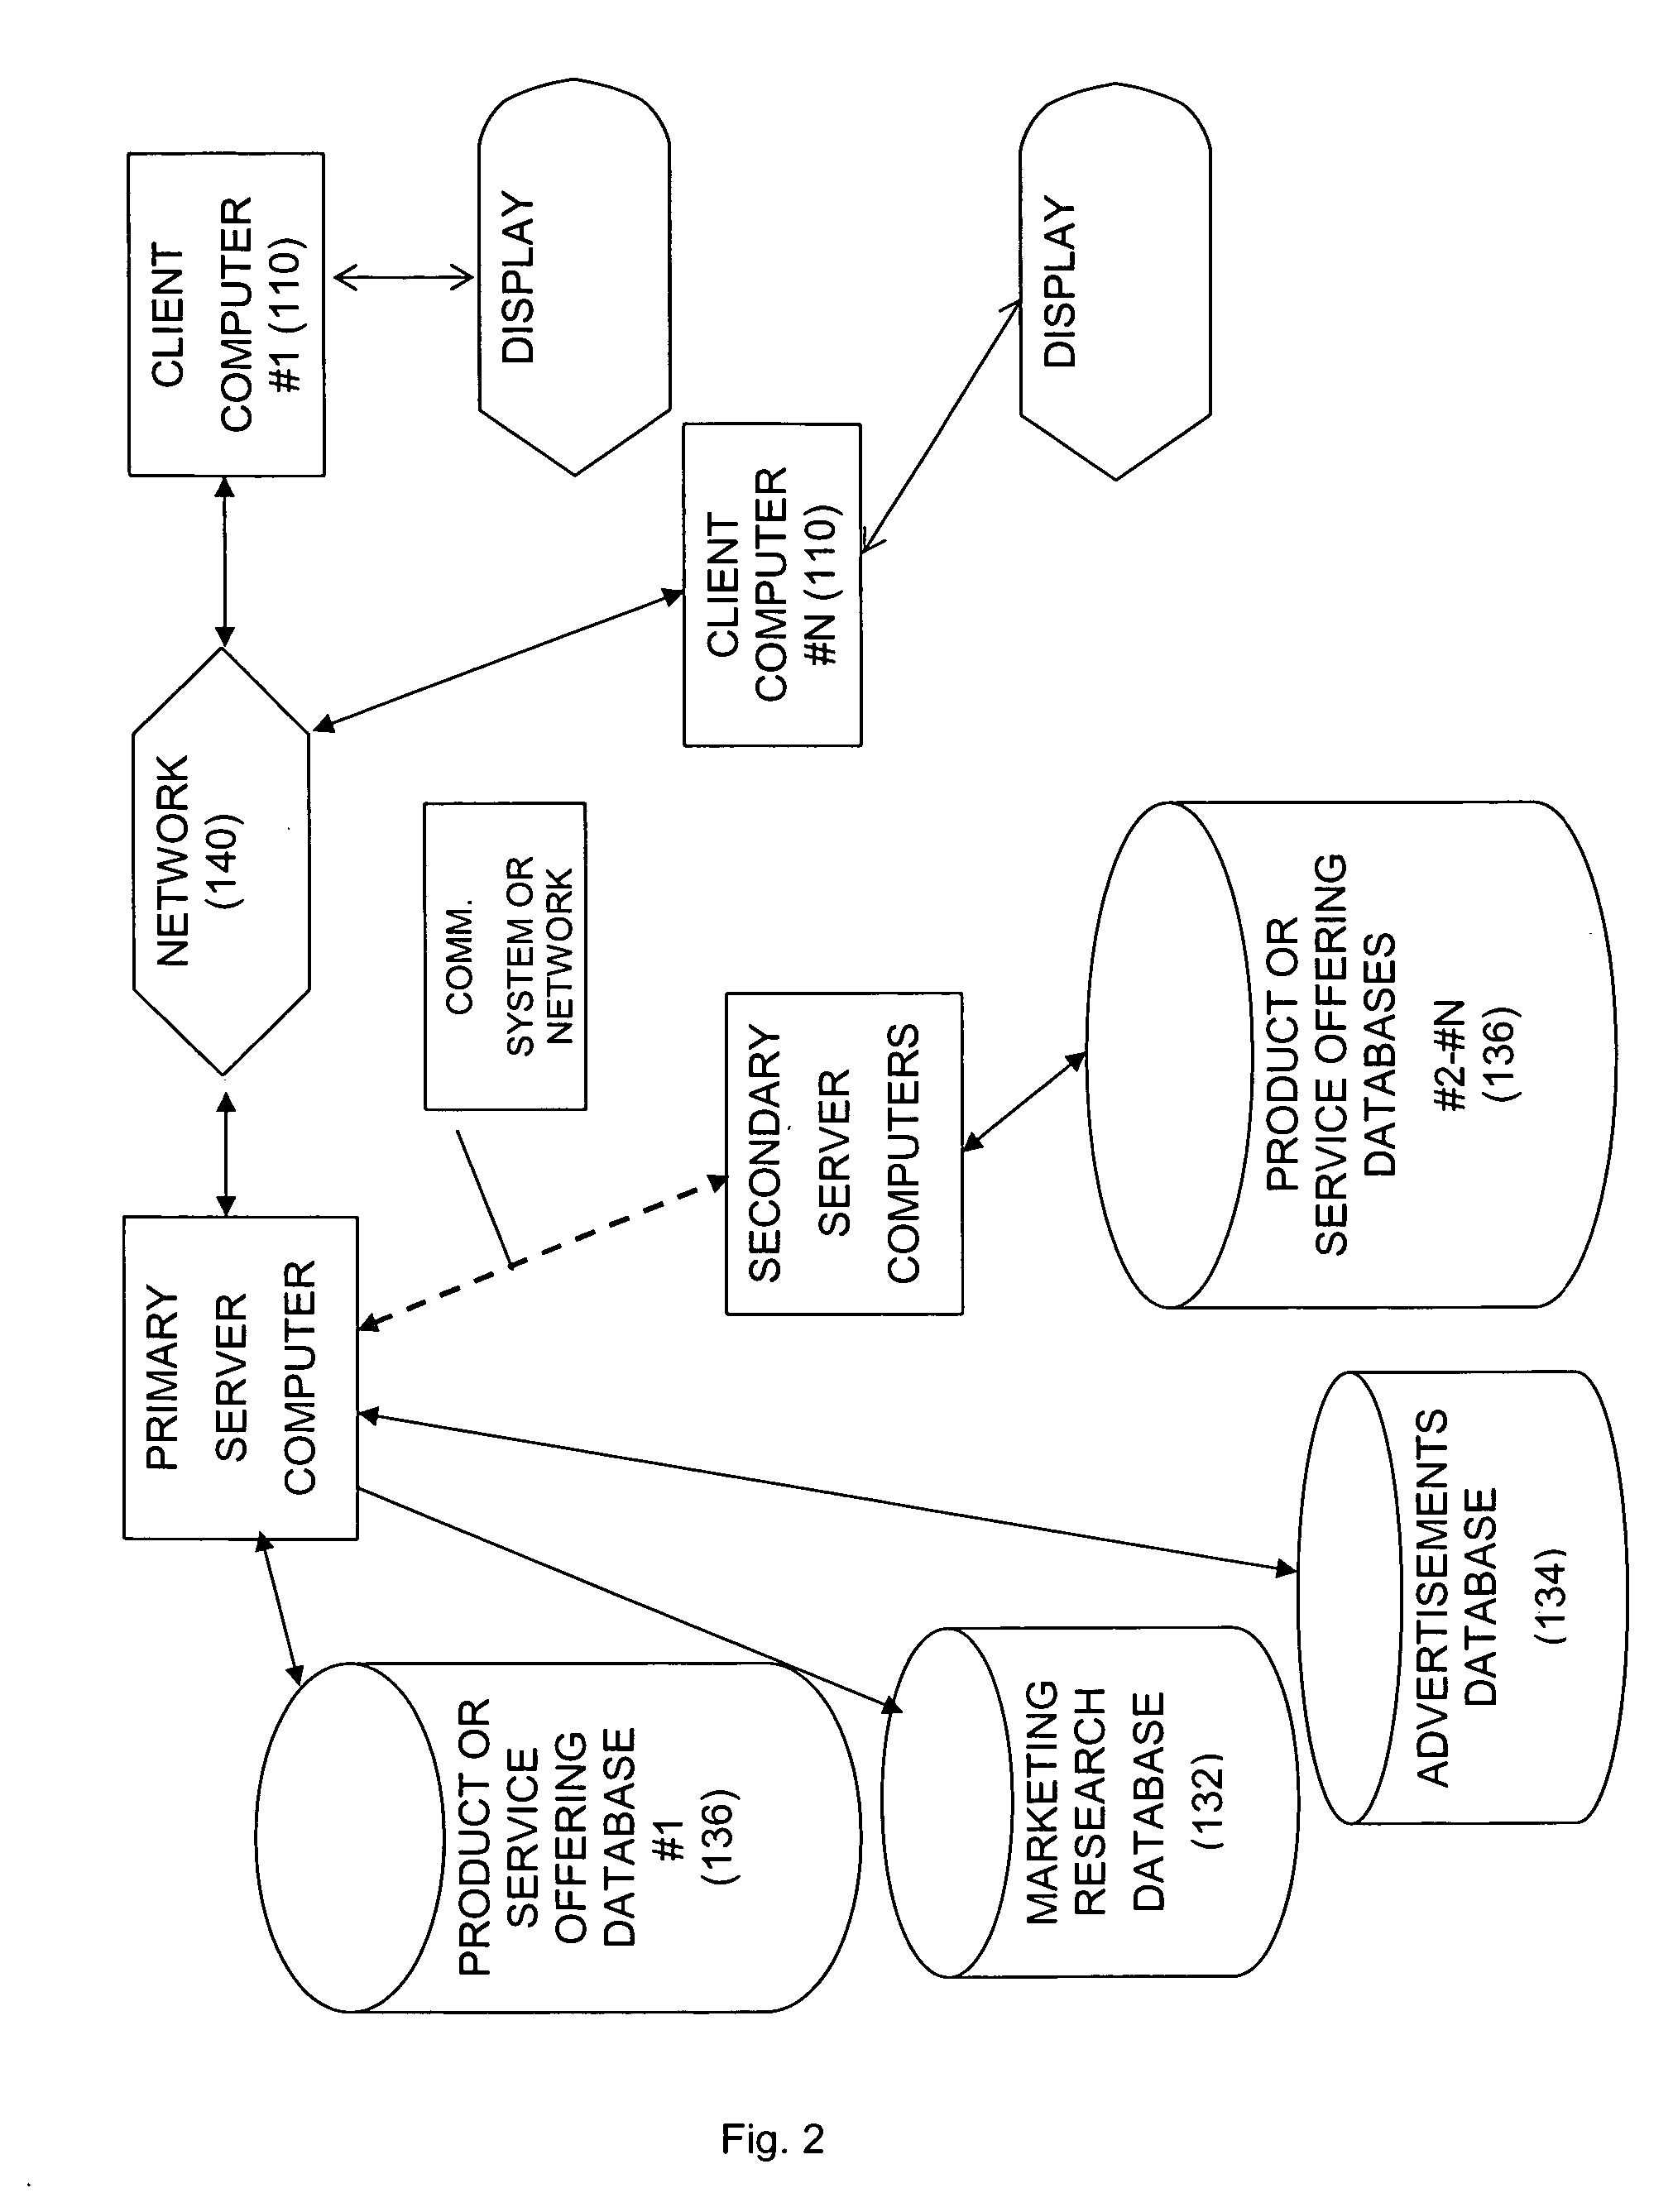 Method and apparatus for obtaining consumer product preferences through product selection and evaluation